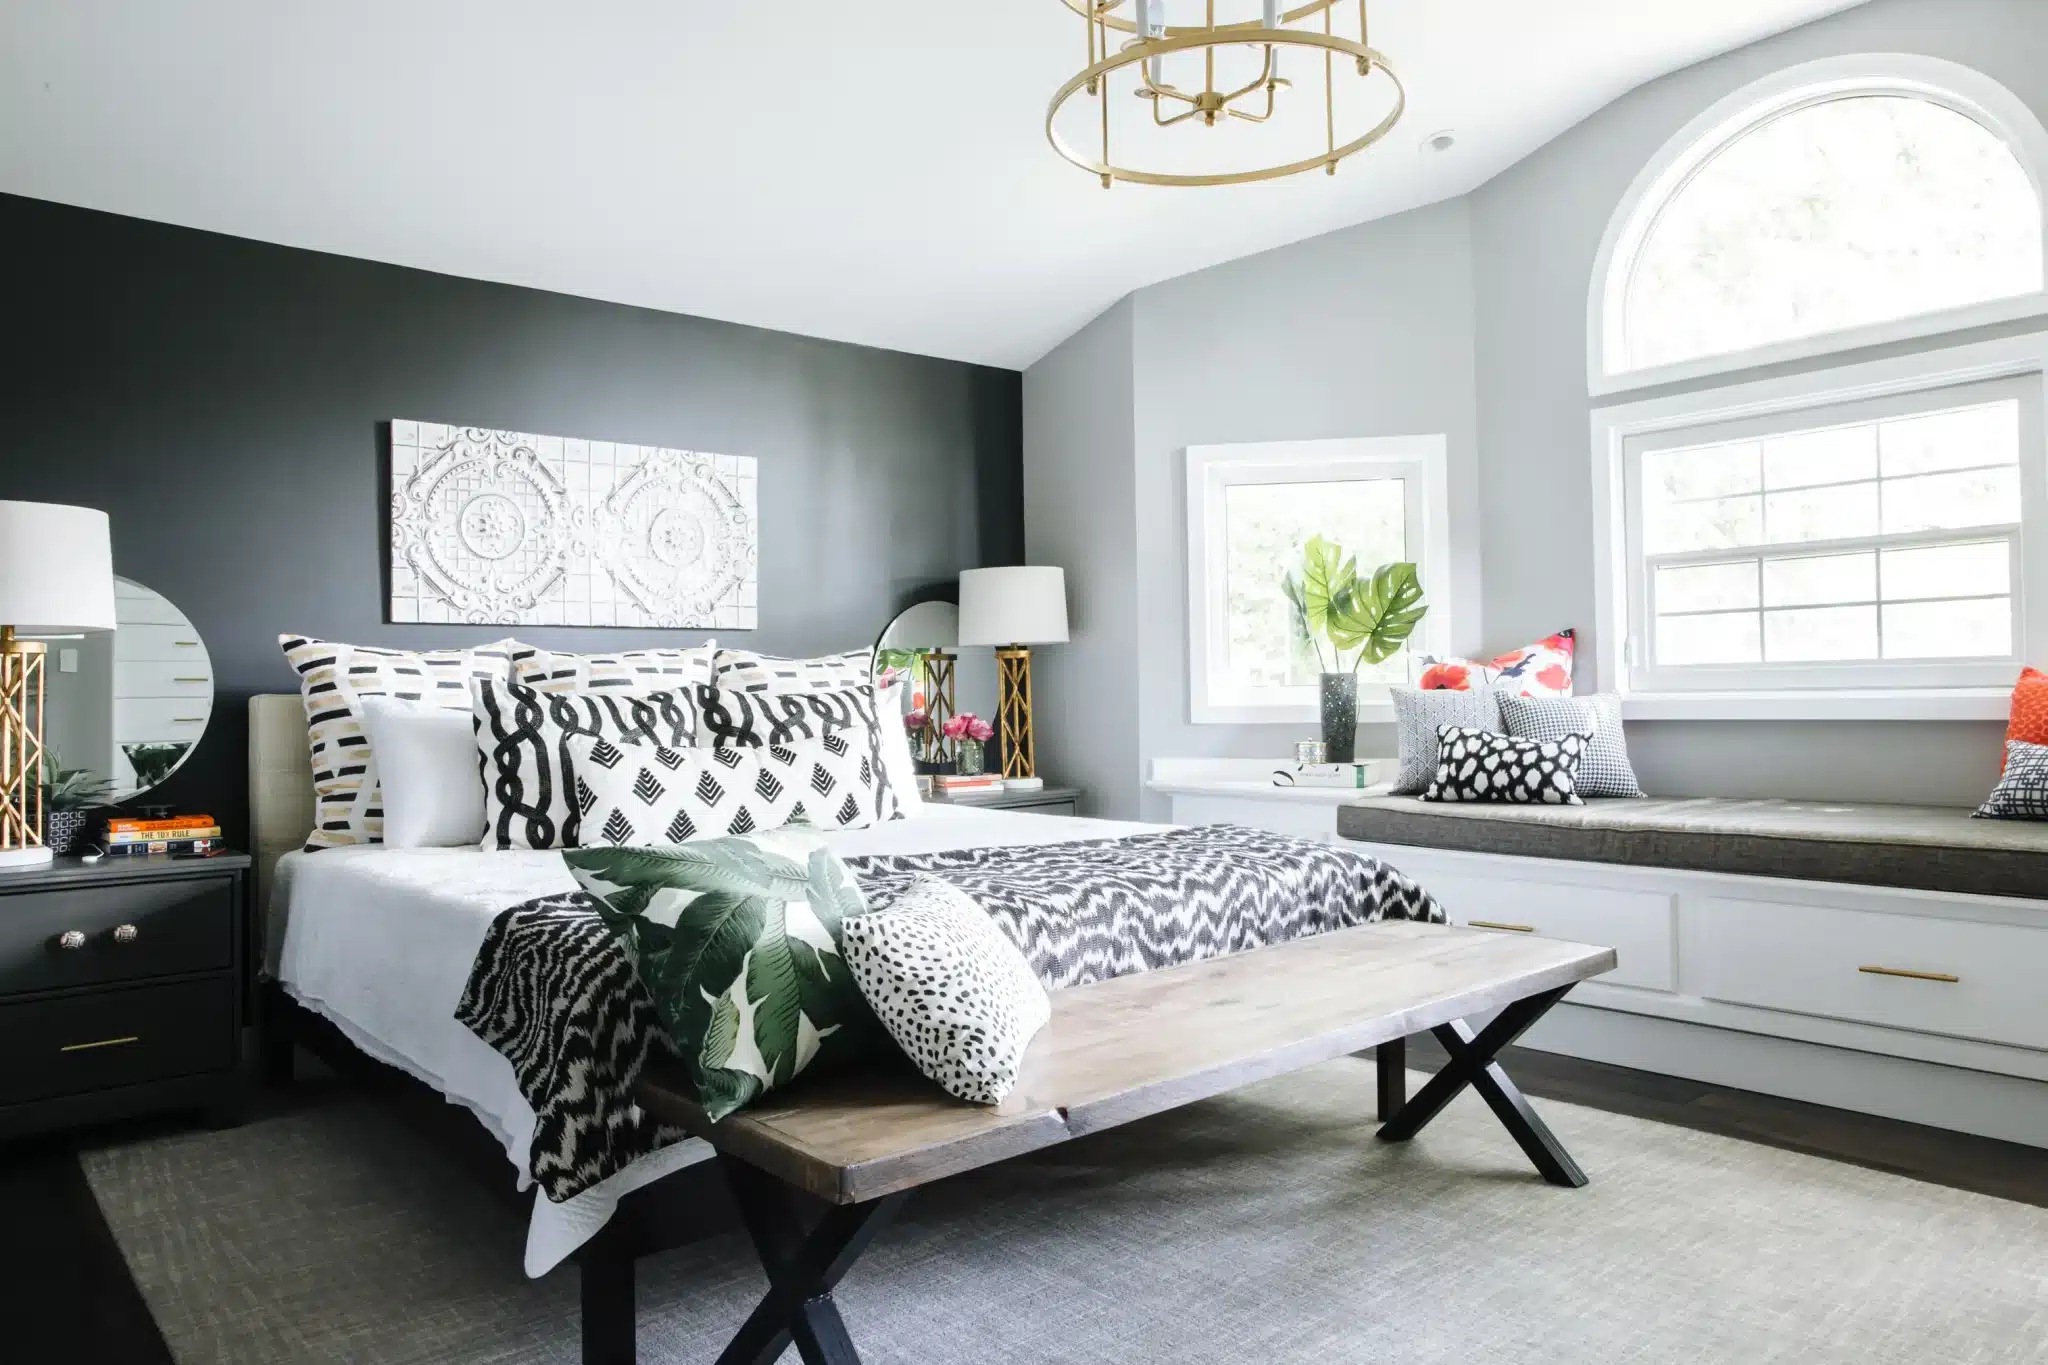 Transform Your Sleep Space: Easy and Affordable Ideas for Bedroom Decor